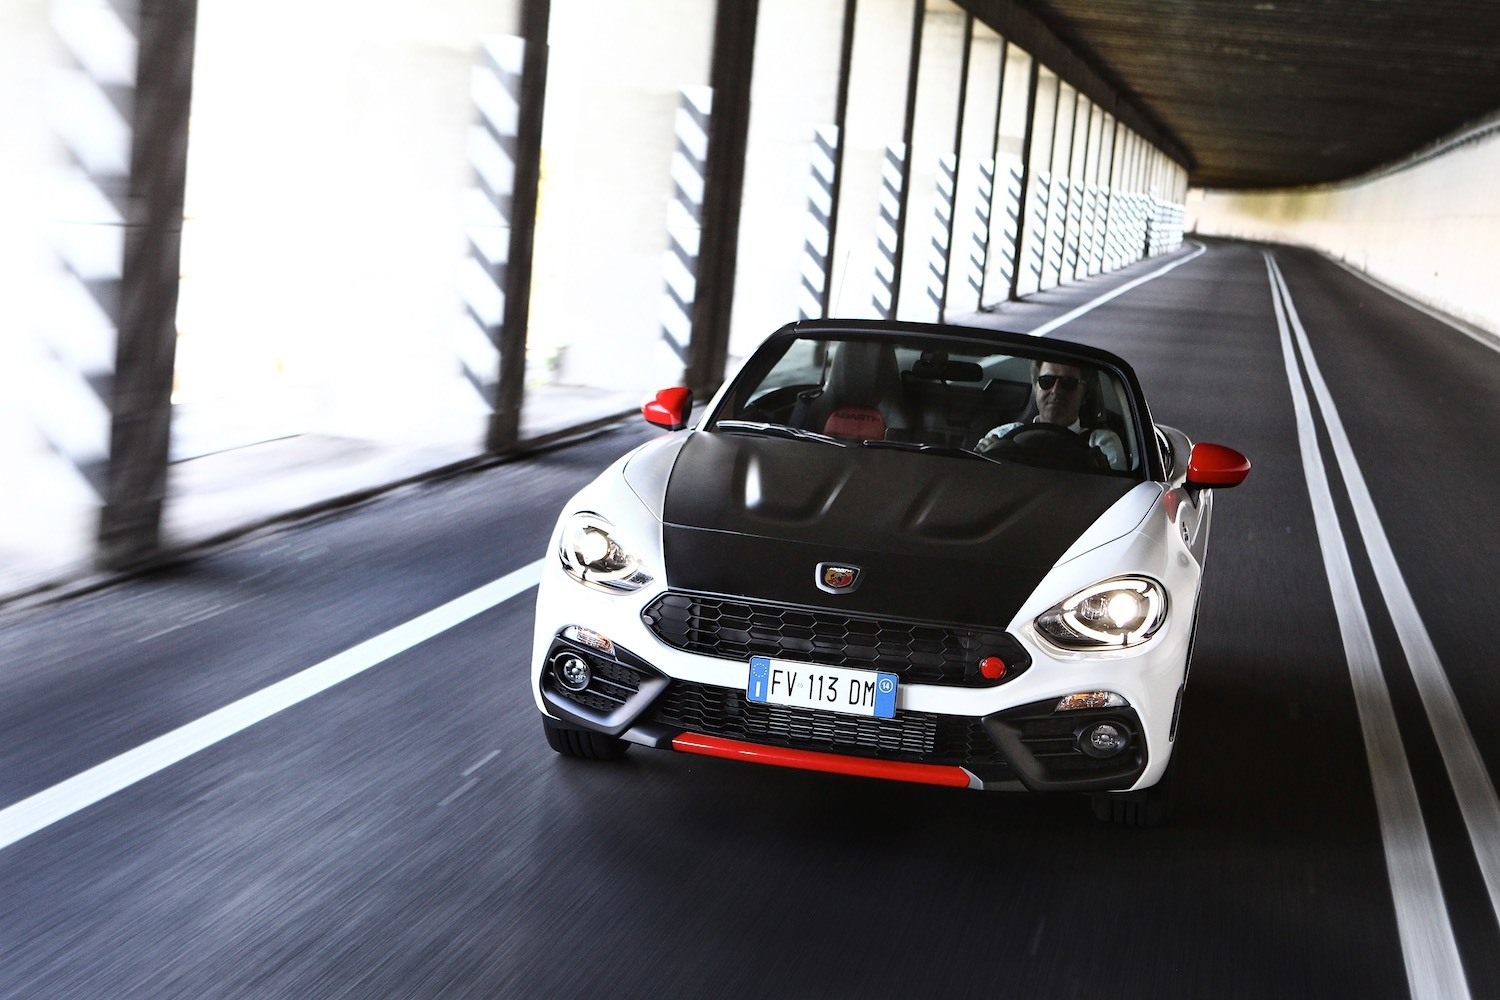 Jonathan Humphrey reviews the Abarth 124 Spider for Drive 8